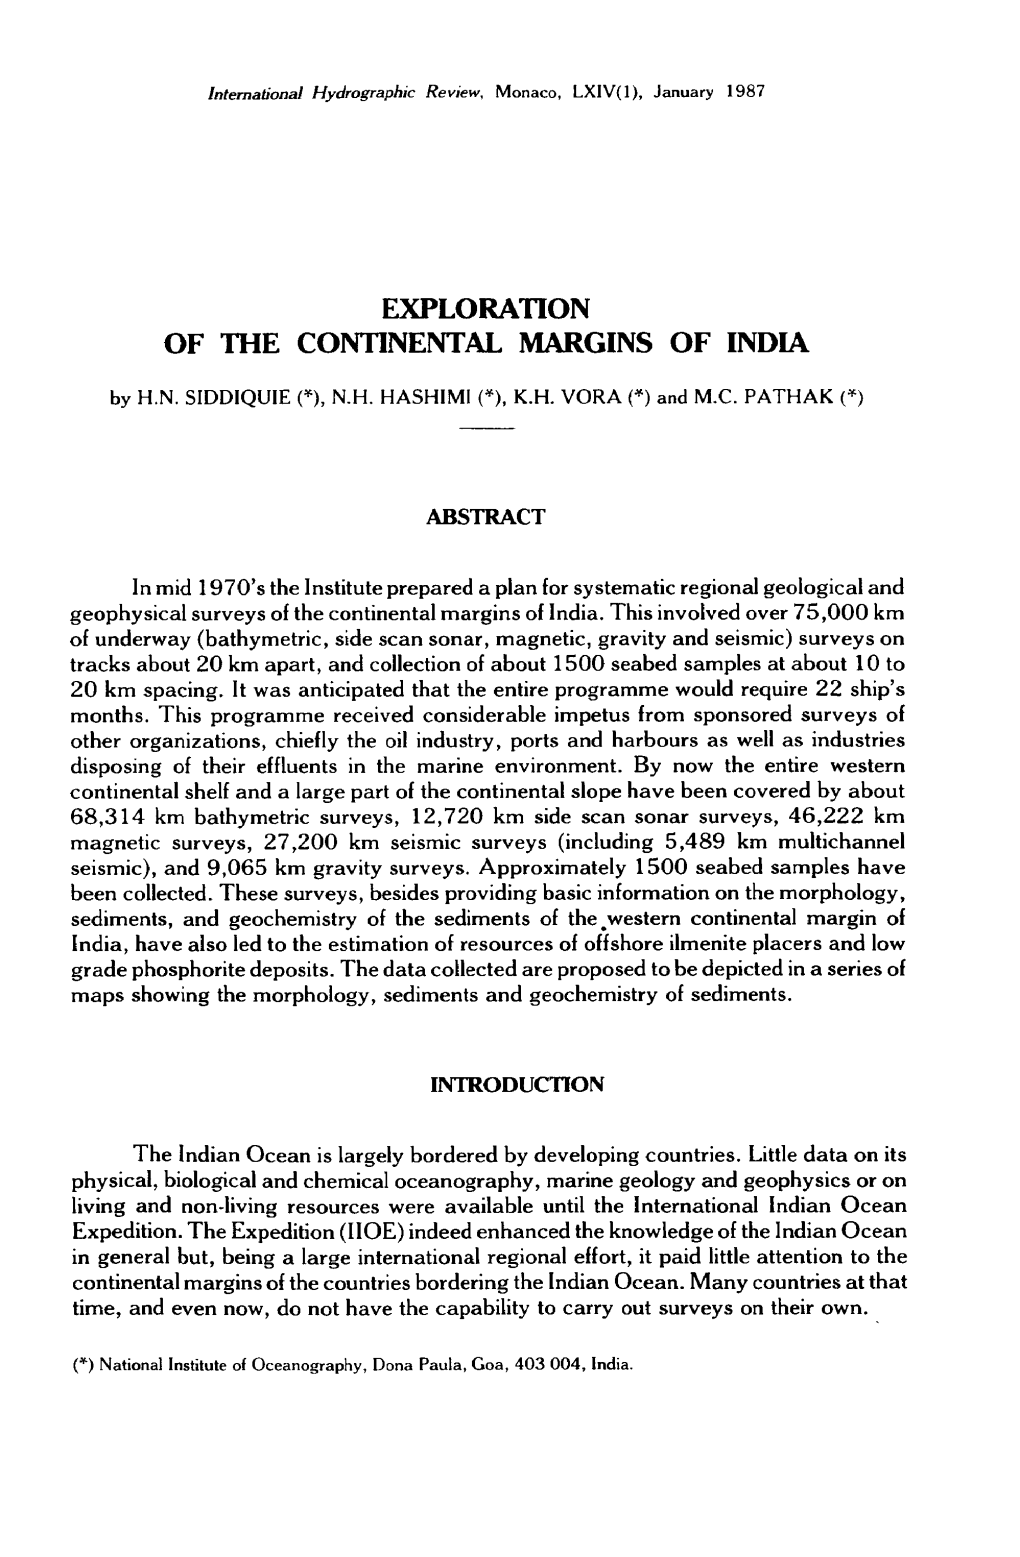 Exploration of the Continental Margins of India